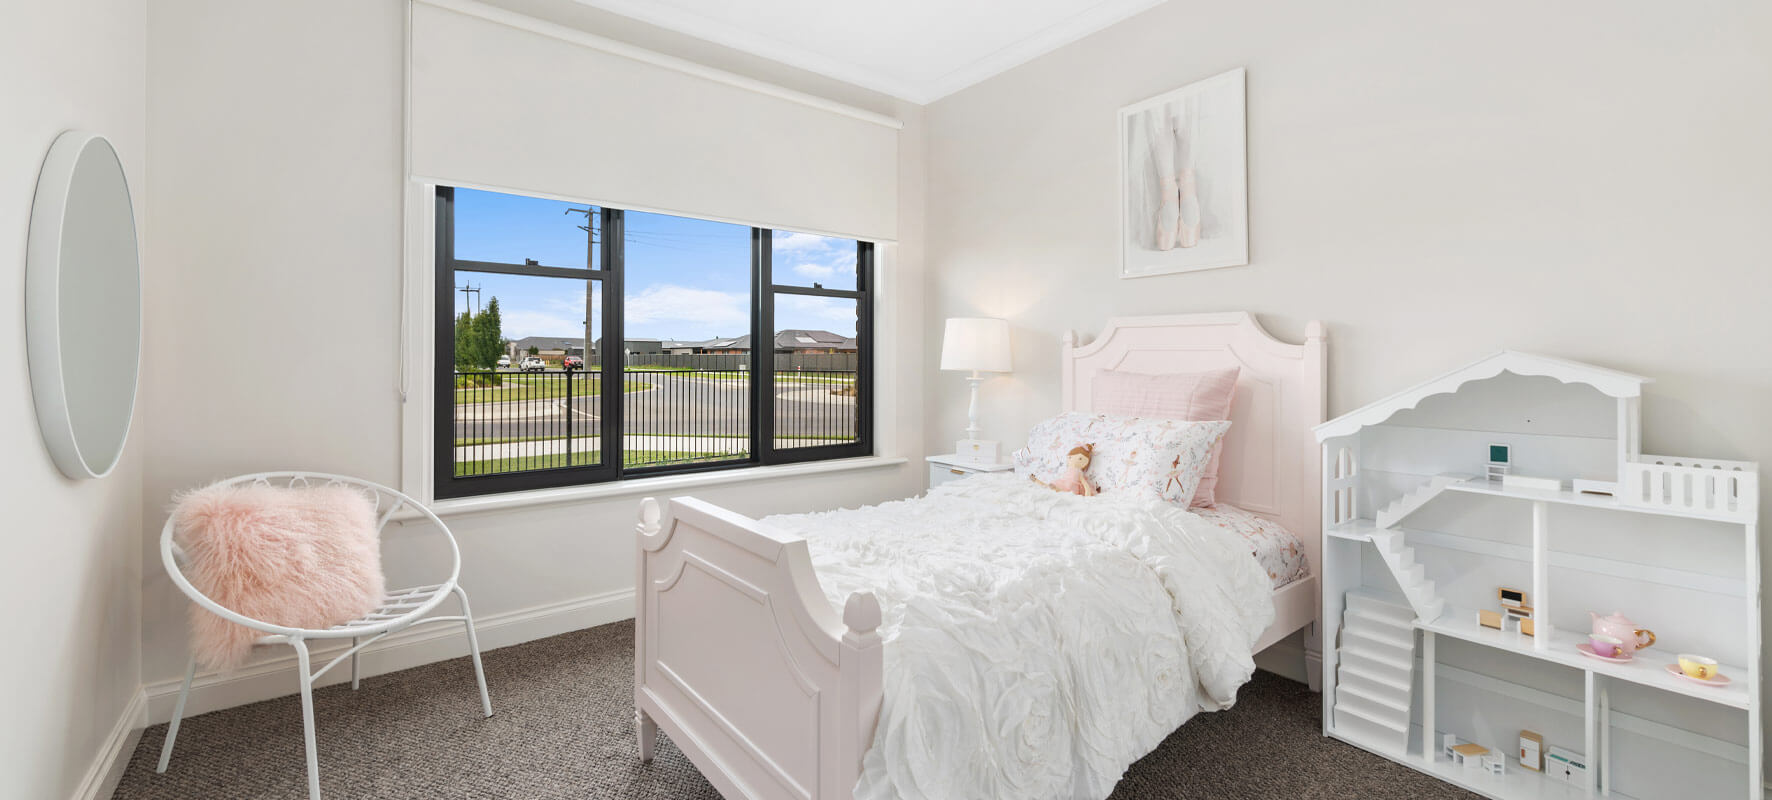 Photo of girls room in Ranch style home showing pretty pink and white bed and white dolls house